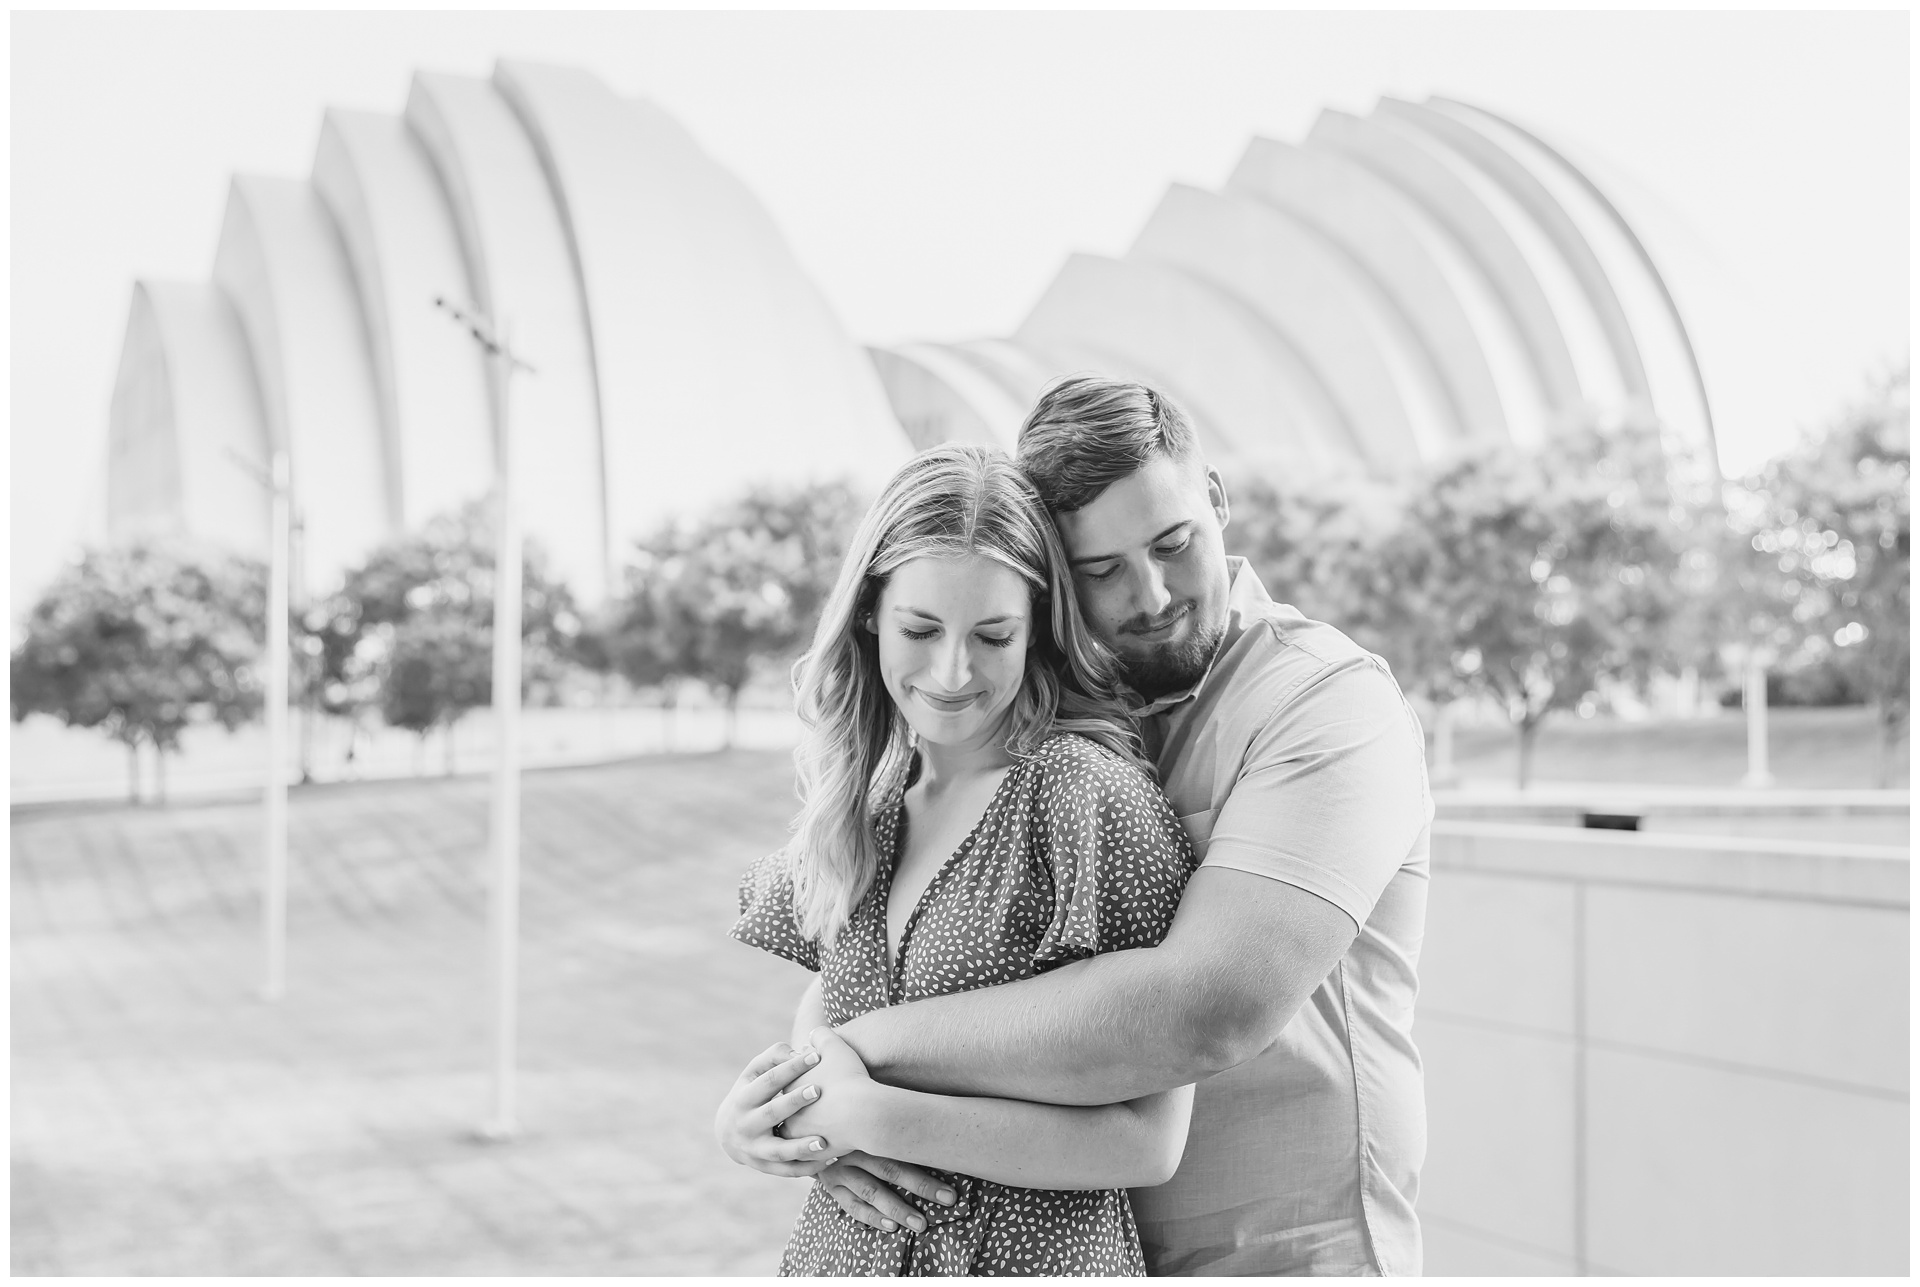 Engagement photography at the Kauffman Center and Penn Valley Park by Kansas City wedding photographers Wisdom-Watson Weddings.